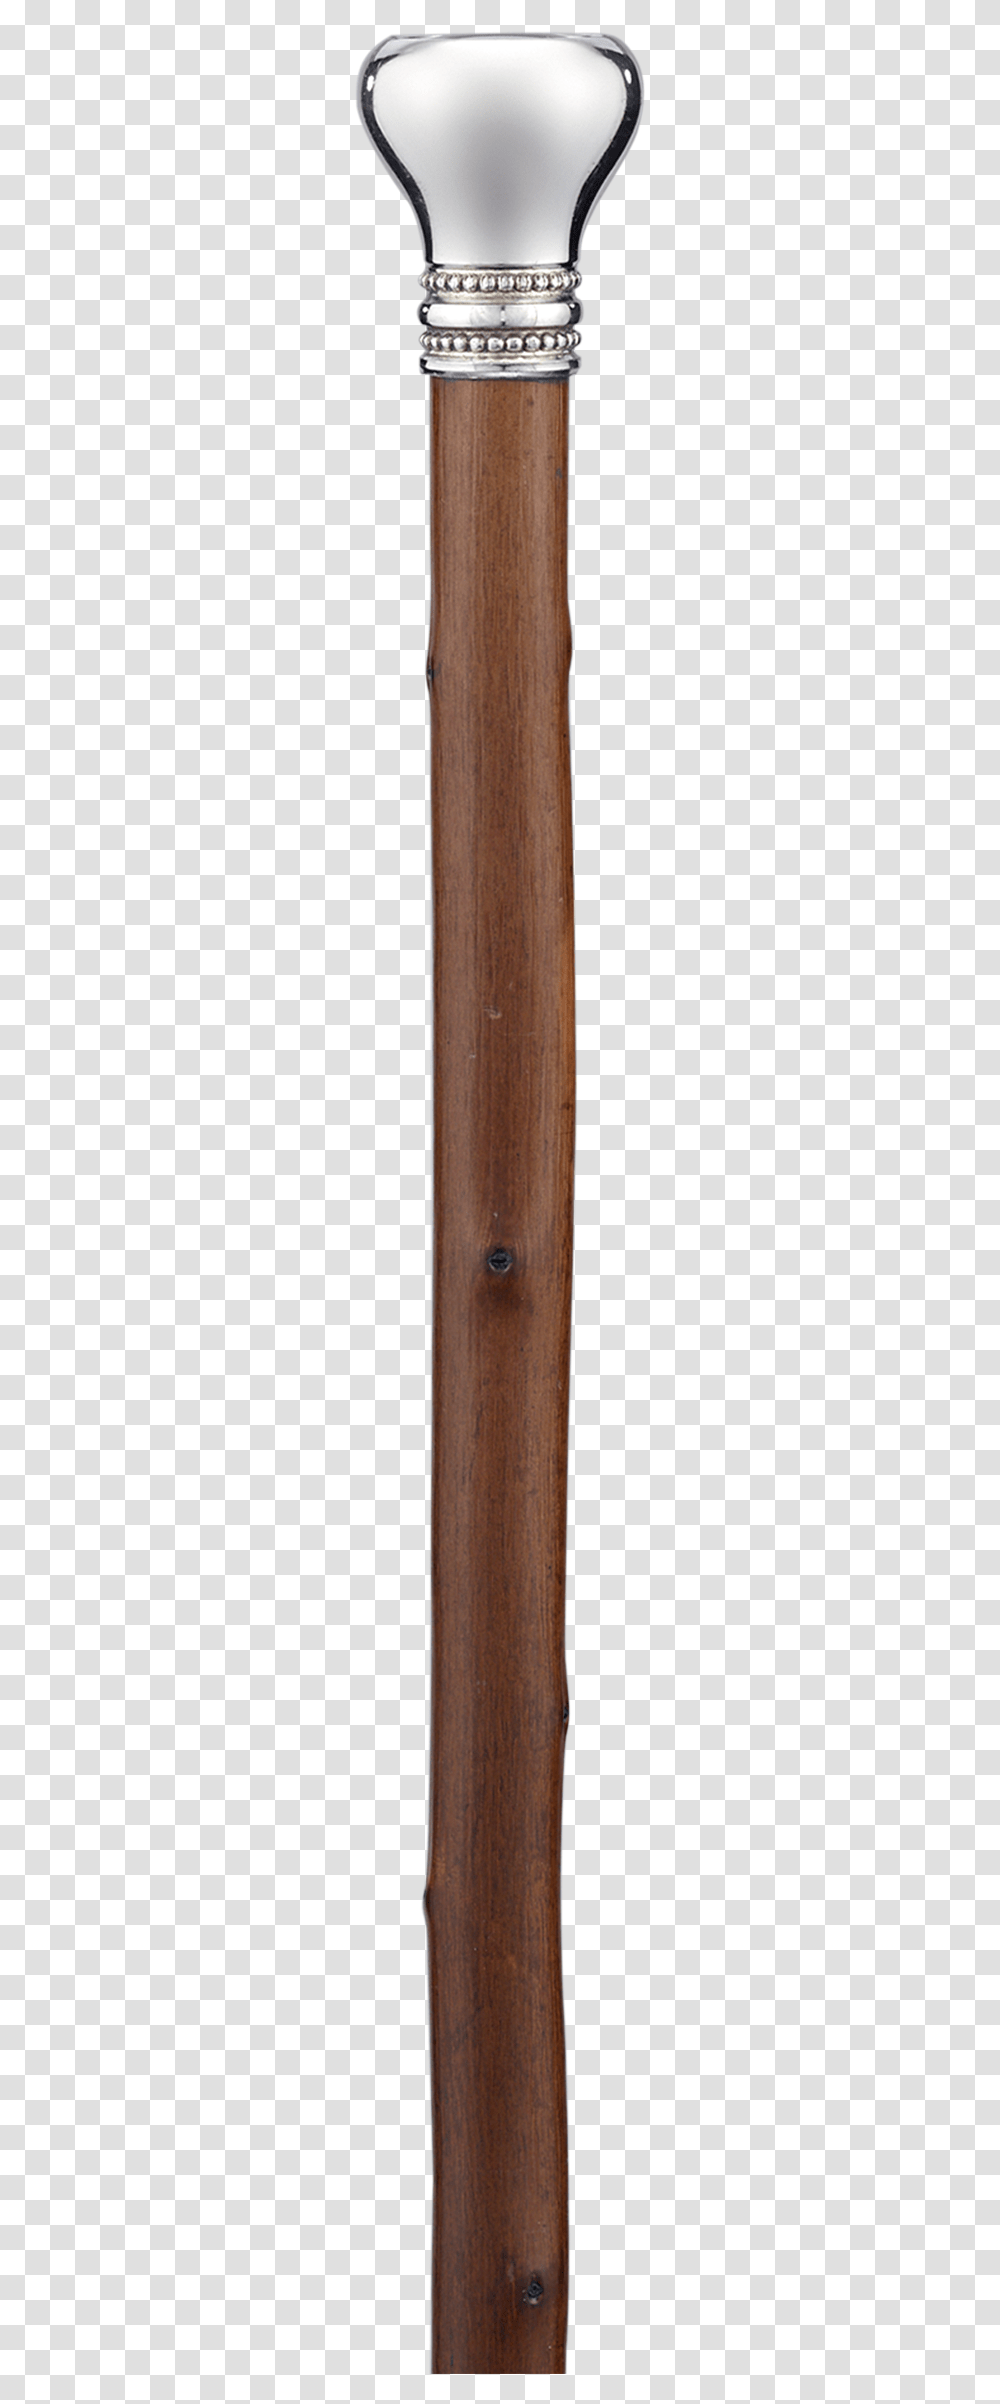 Ornamental Silverplate And Knotted Wood Walking Stick Wood, Hardwood, Outdoors, Nature, Stained Wood Transparent Png